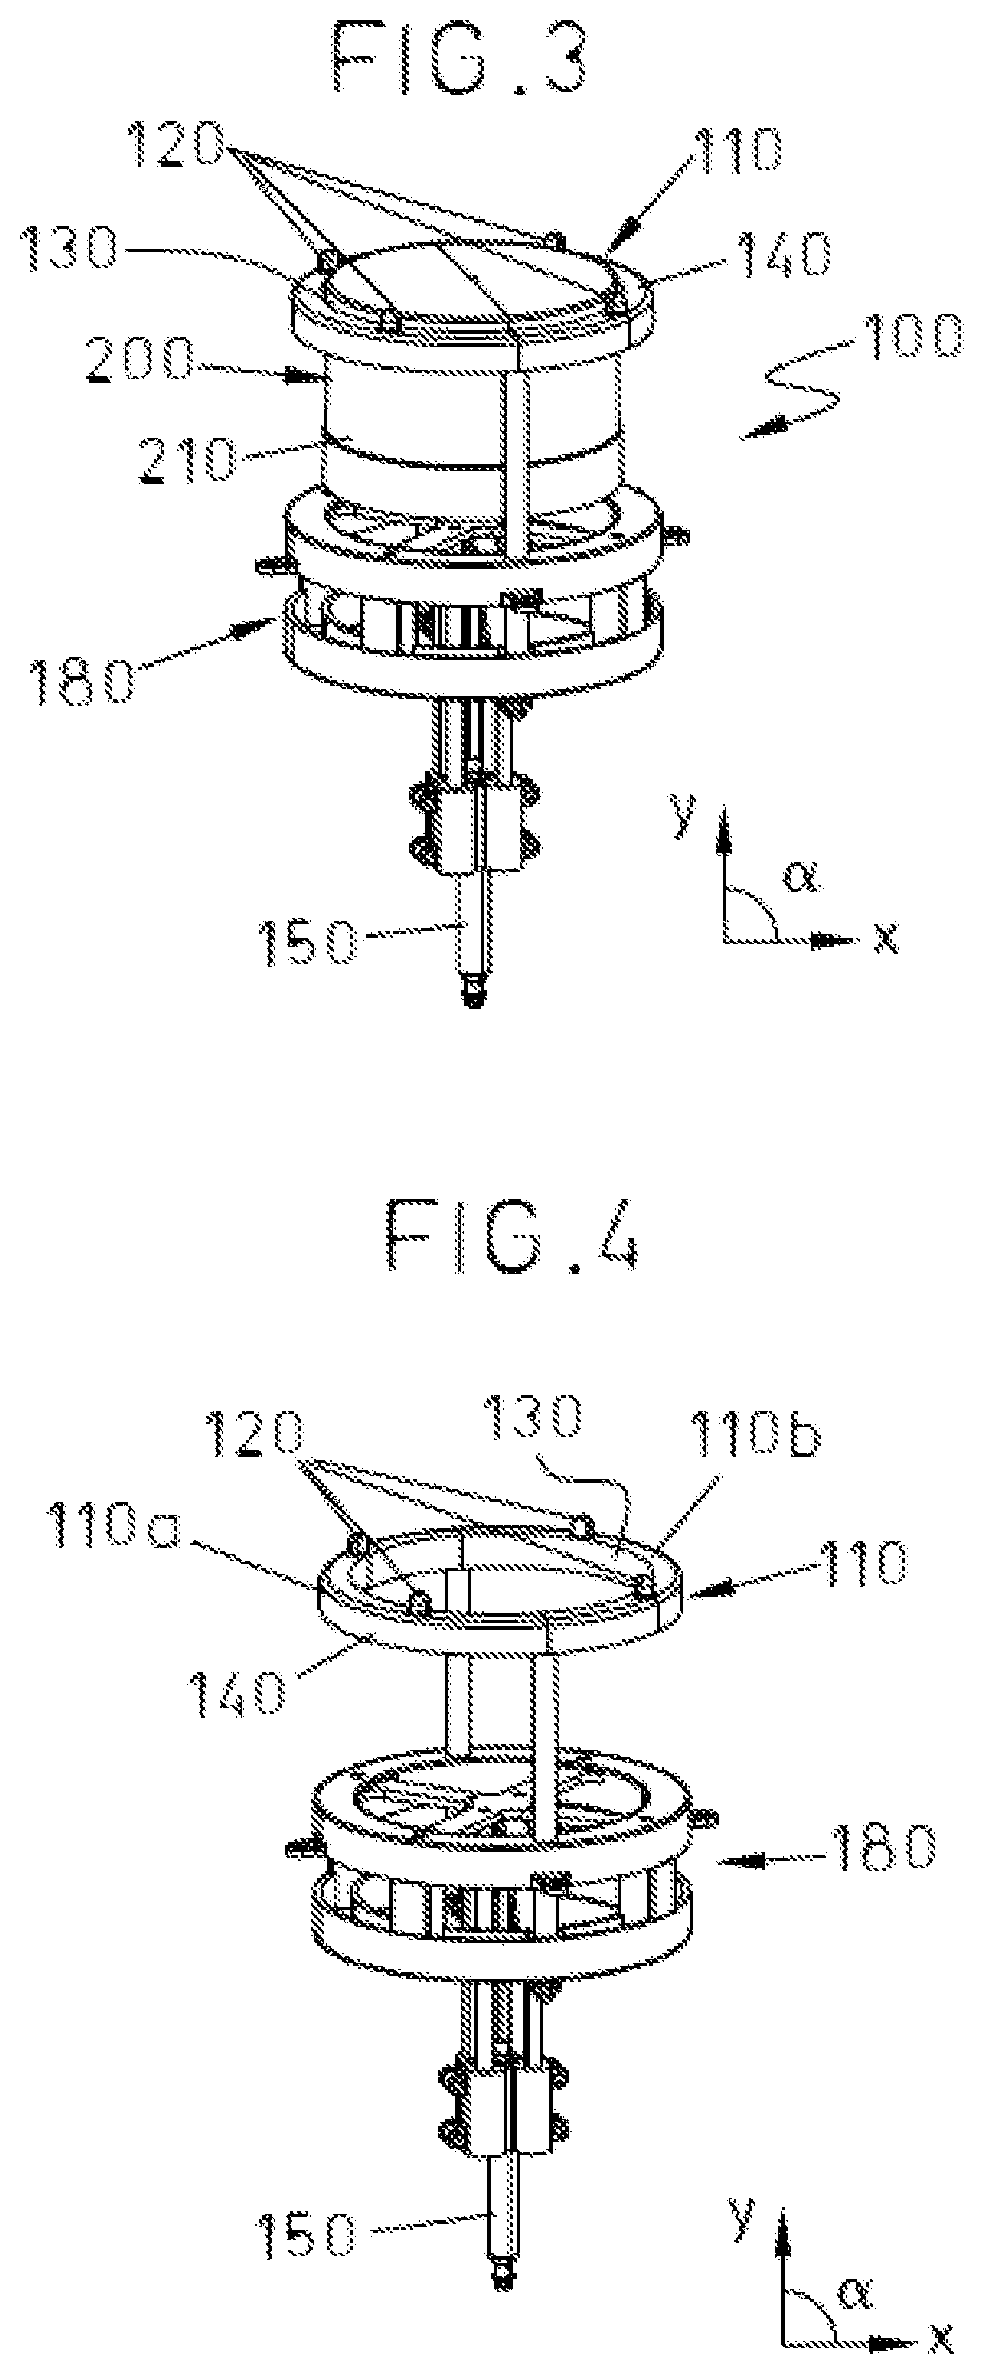 Washing arrangement for washing a surface of a target device and method for washing a surface of a target device using said washing arrangement